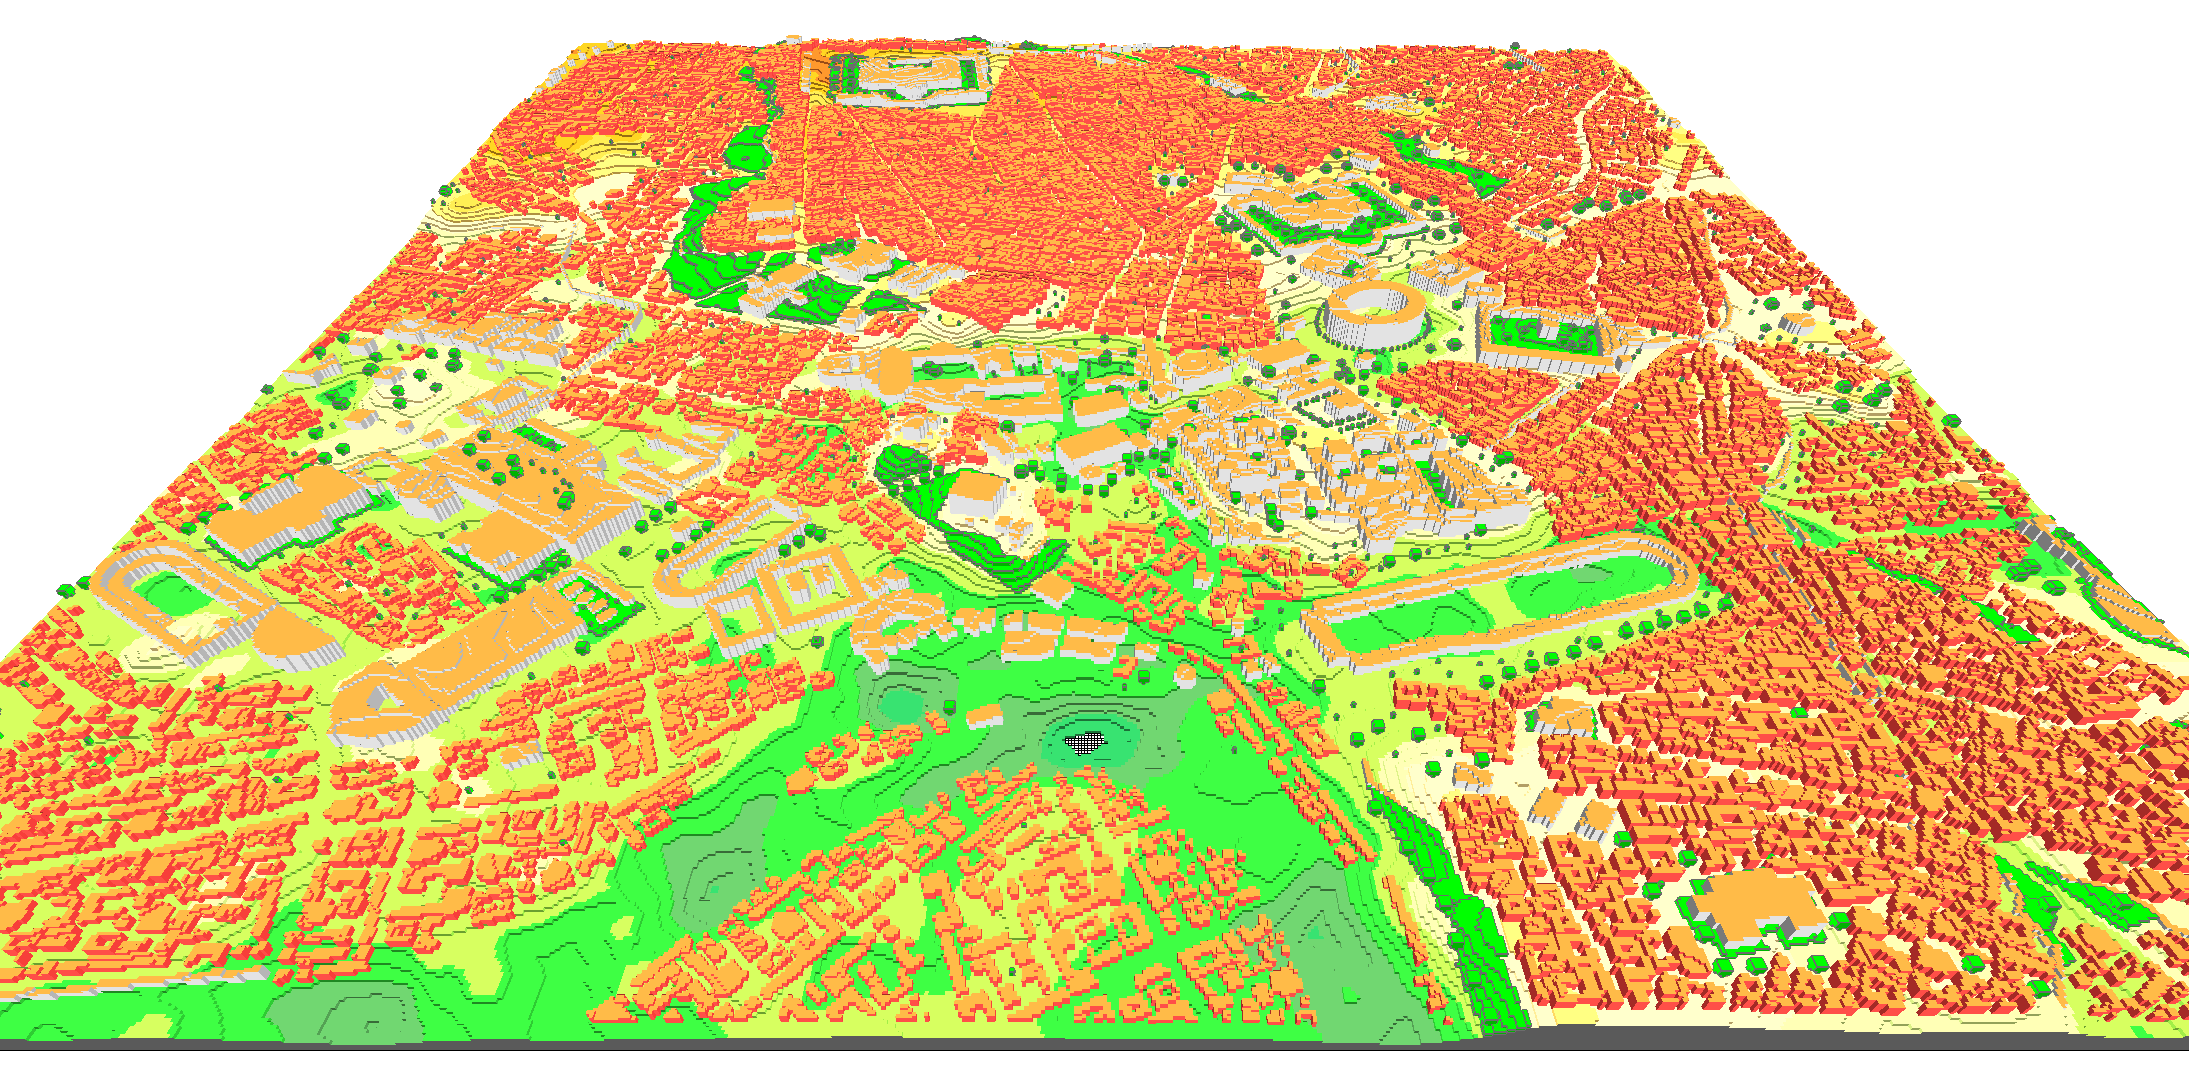 QGIS 2 Leading software for high-resolution 3D modeling of urban microclimate to analyze the impact of buildings, vegetation, etc. on the urban climate with the aim of planning climate-friendly cities and improving the quality of life in metropolitan areas - designed for professional use by architects, landscape architects, urban planners etc., as well as for research at universities.